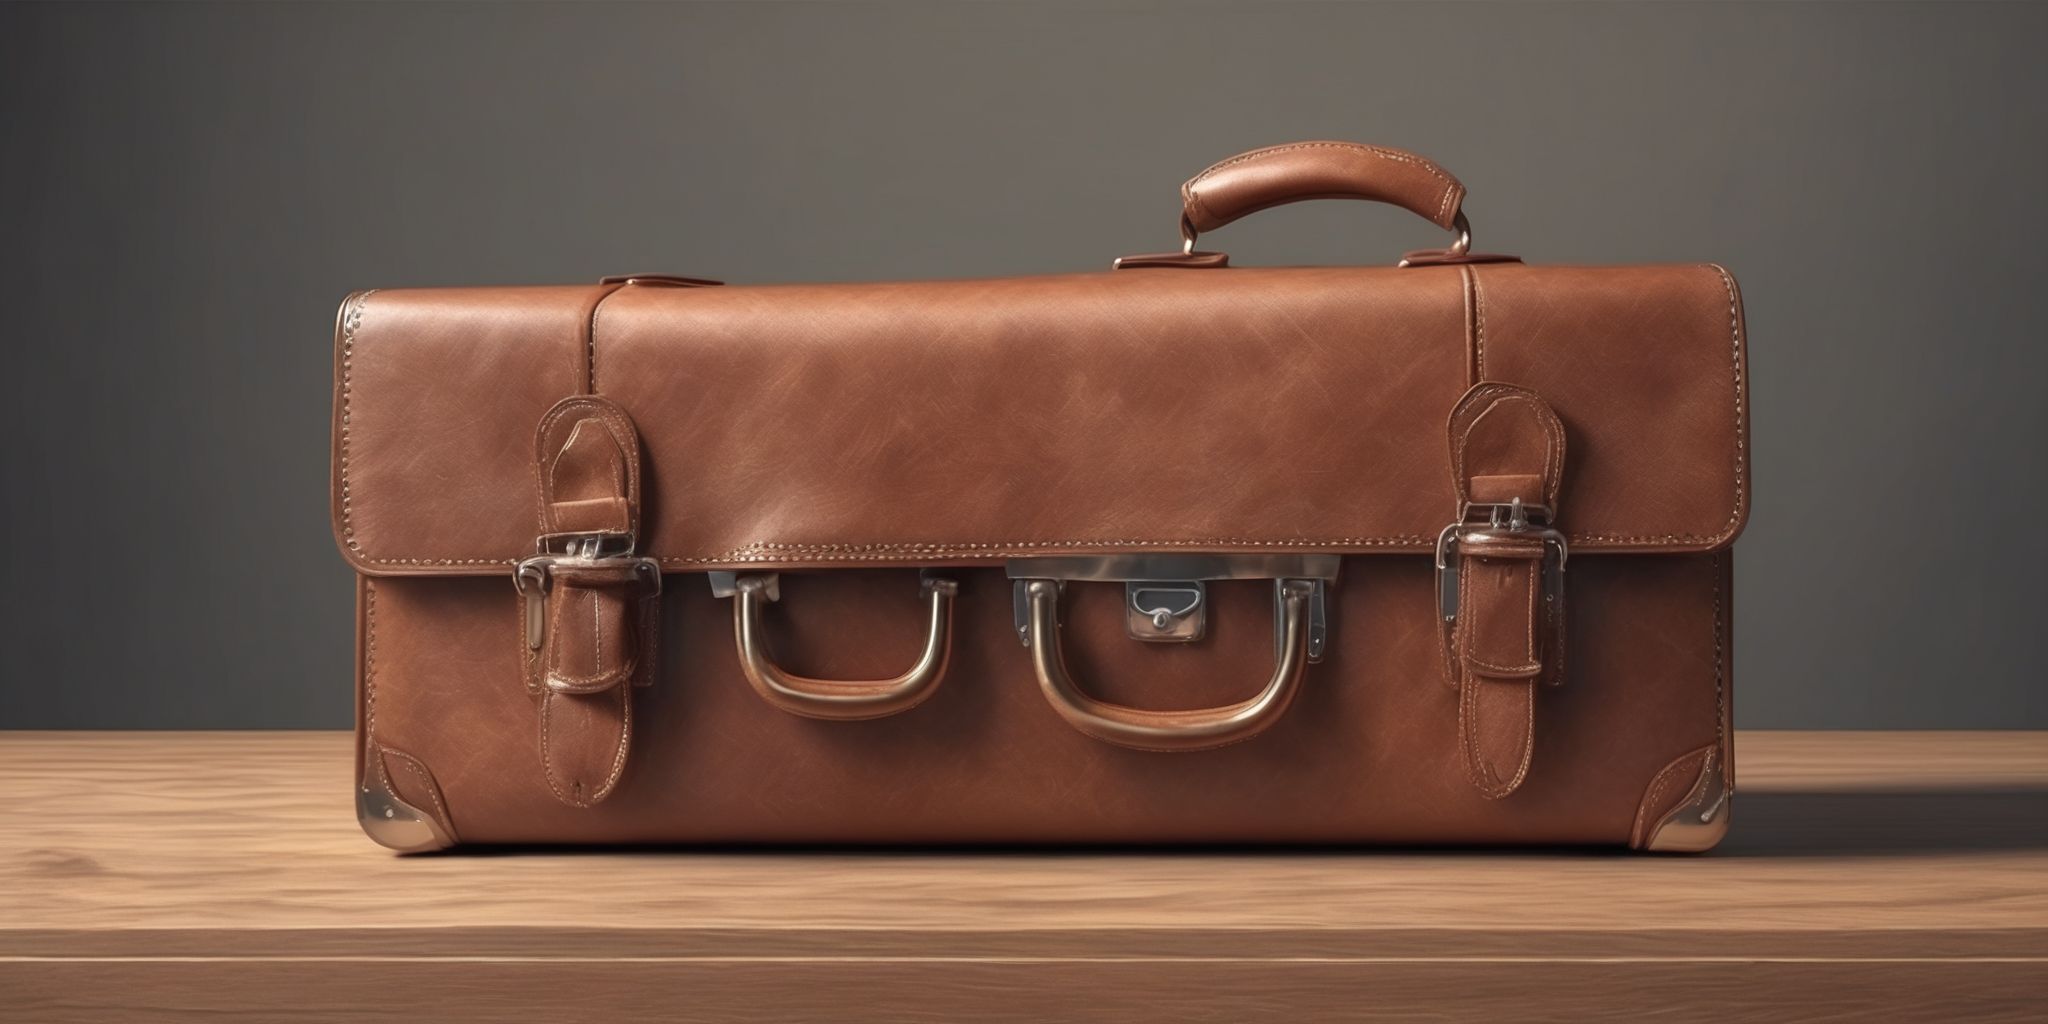 Briefcase  in realistic, photographic style